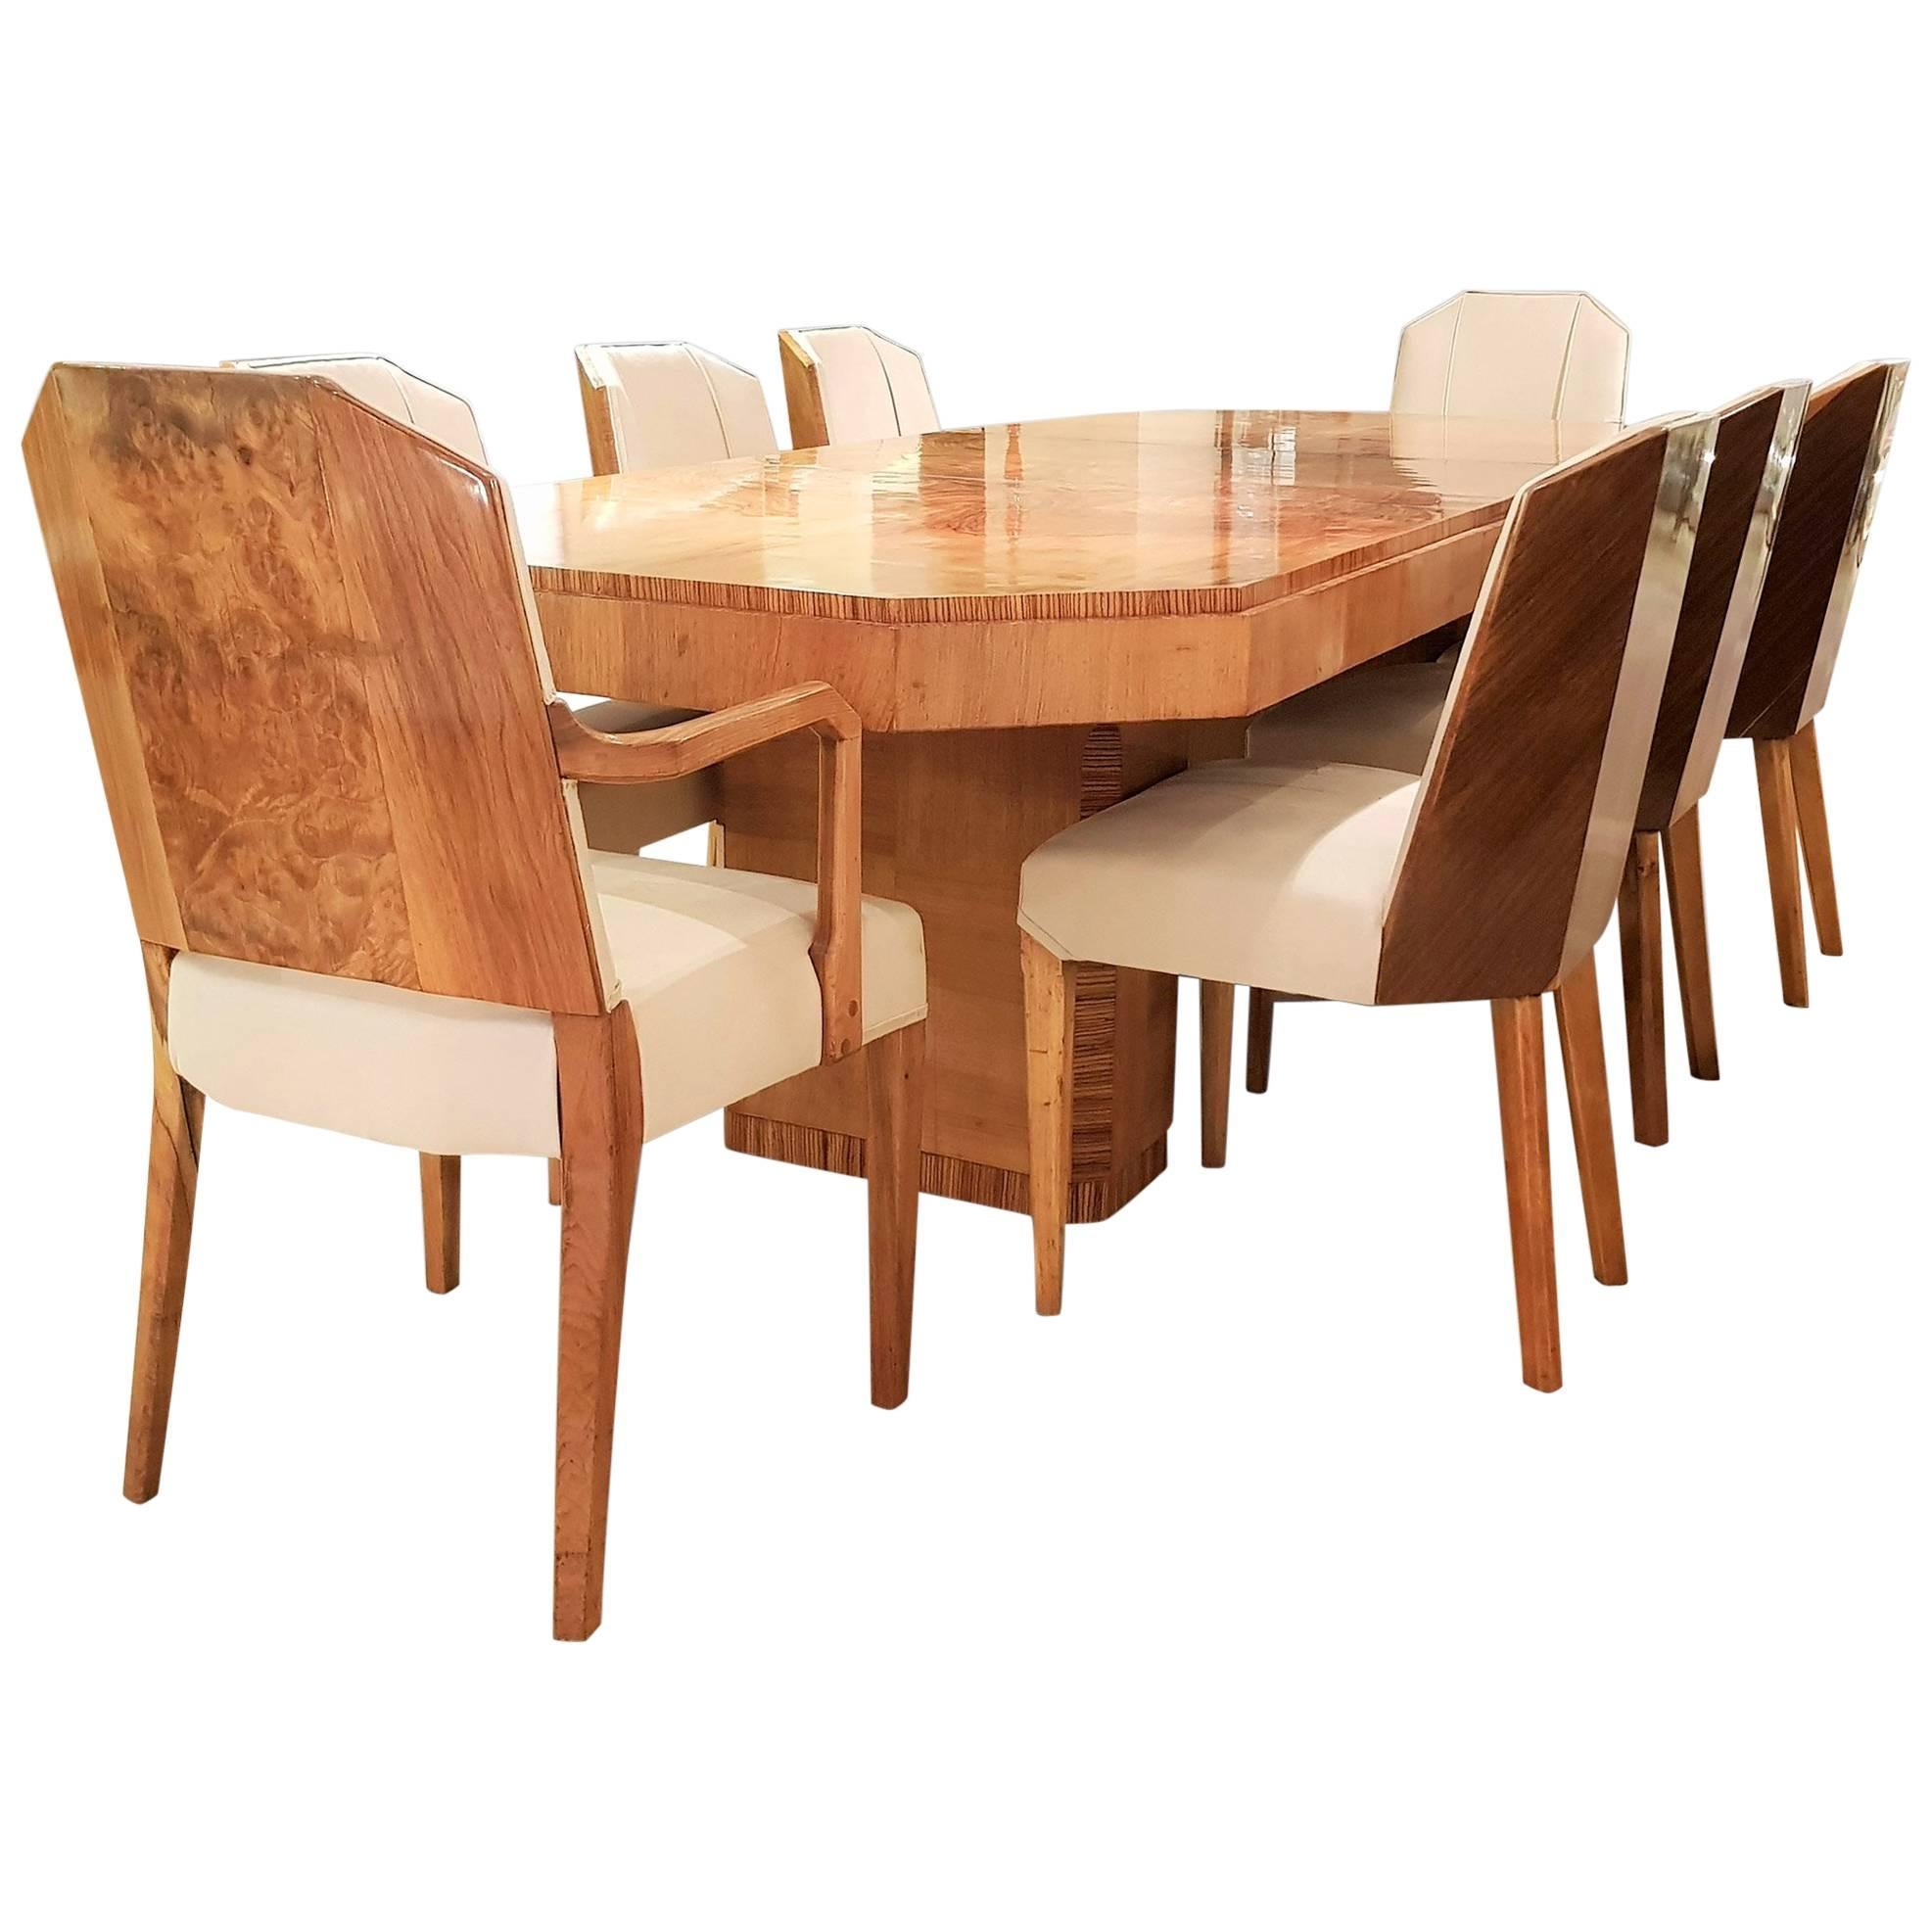 Art Deco Dining Table, Chairs and Carvers Attributed to Hille